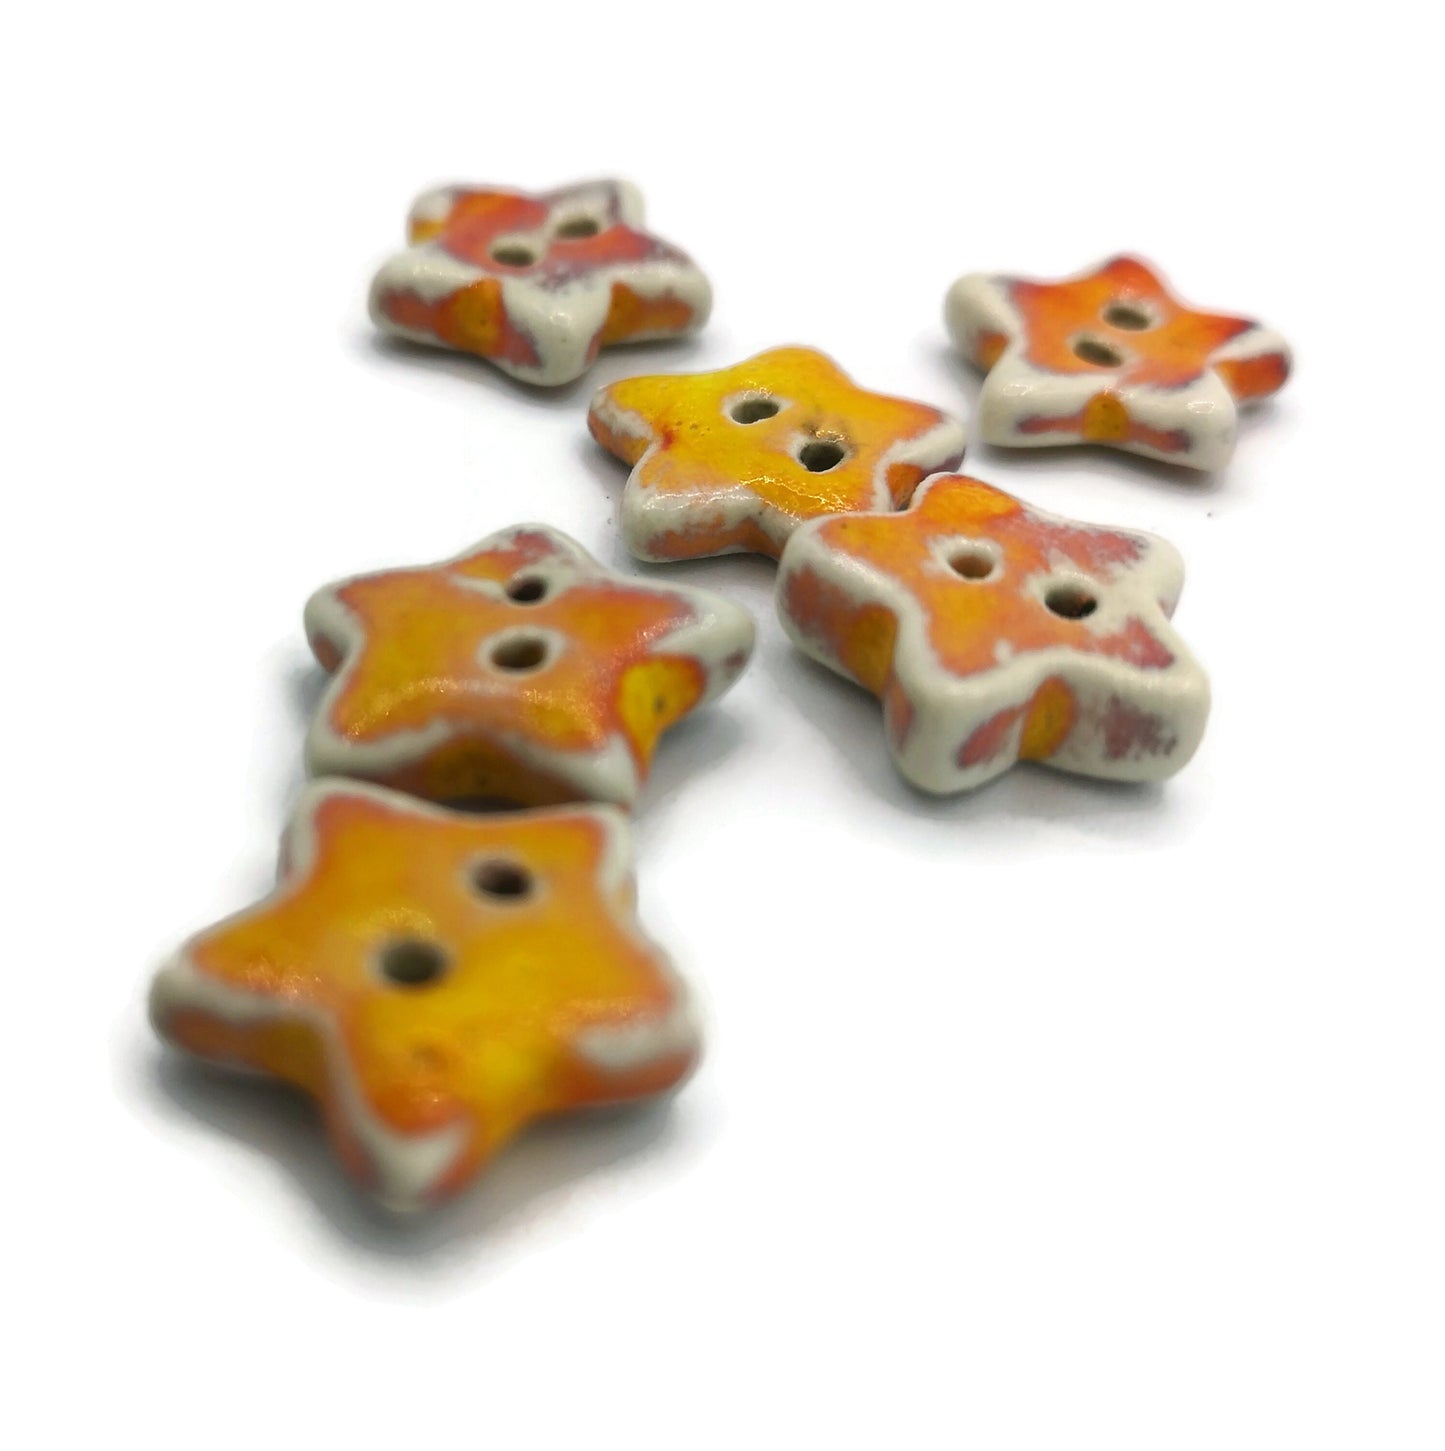 6 Pcs Handmade Ceramic Coat Buttons, Orange or Blue Cute Star Buttons 15mm, Sewing Supplies And Notions Ready to Ship, Custom Buttons - Ceramica Ana Rafael